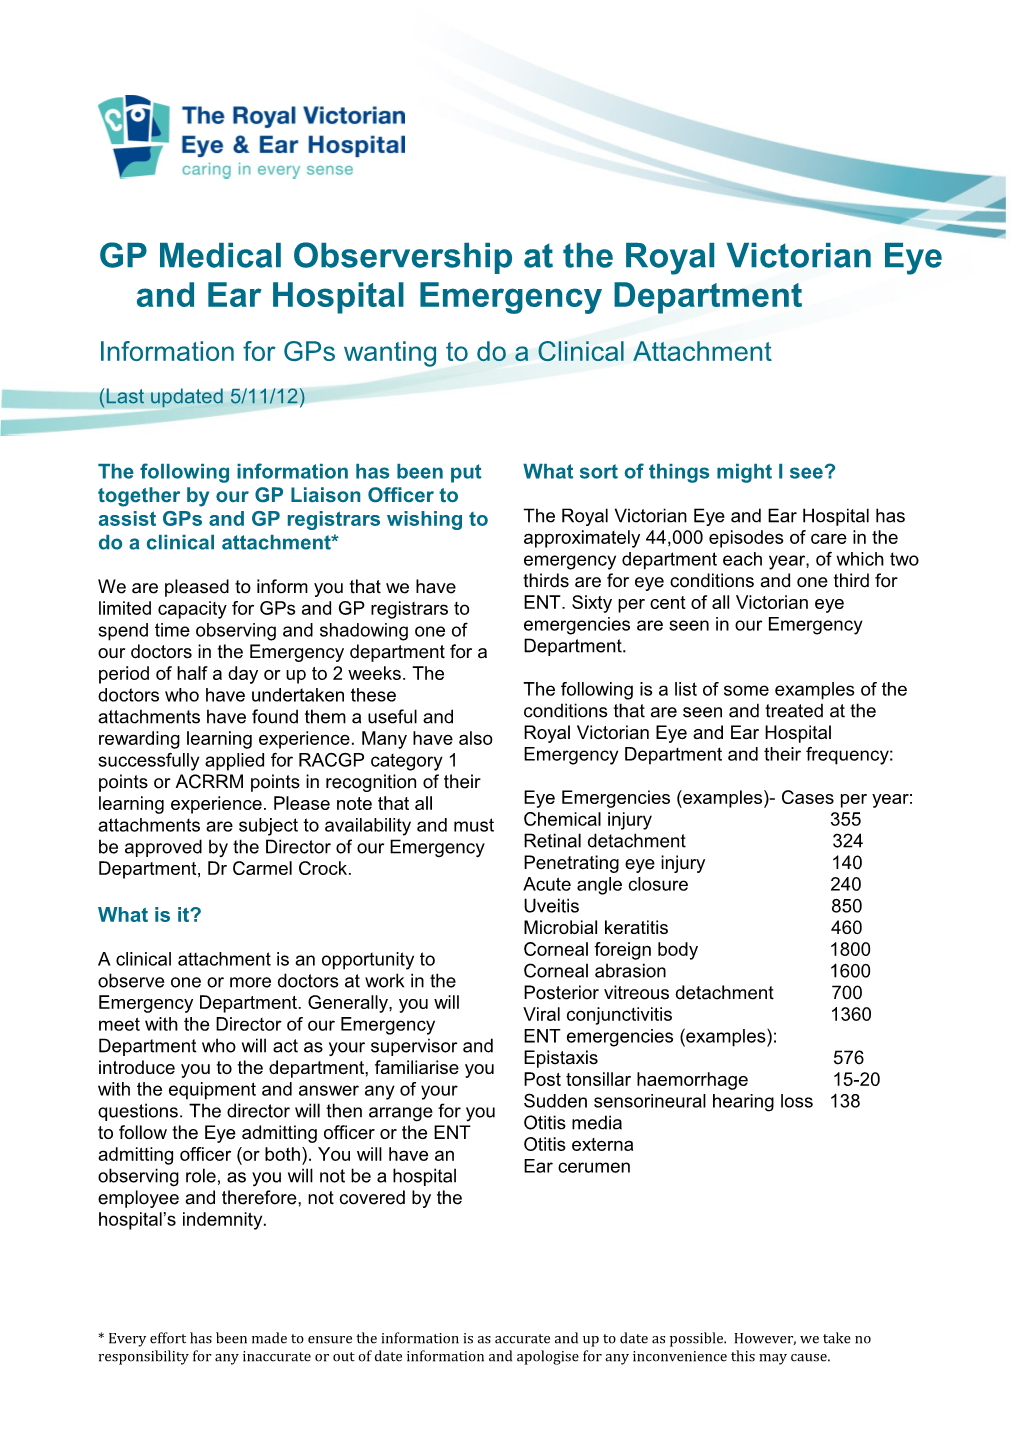 The Following Information Has Been Put Together by Our GP Liaison Officer to Assist Gps